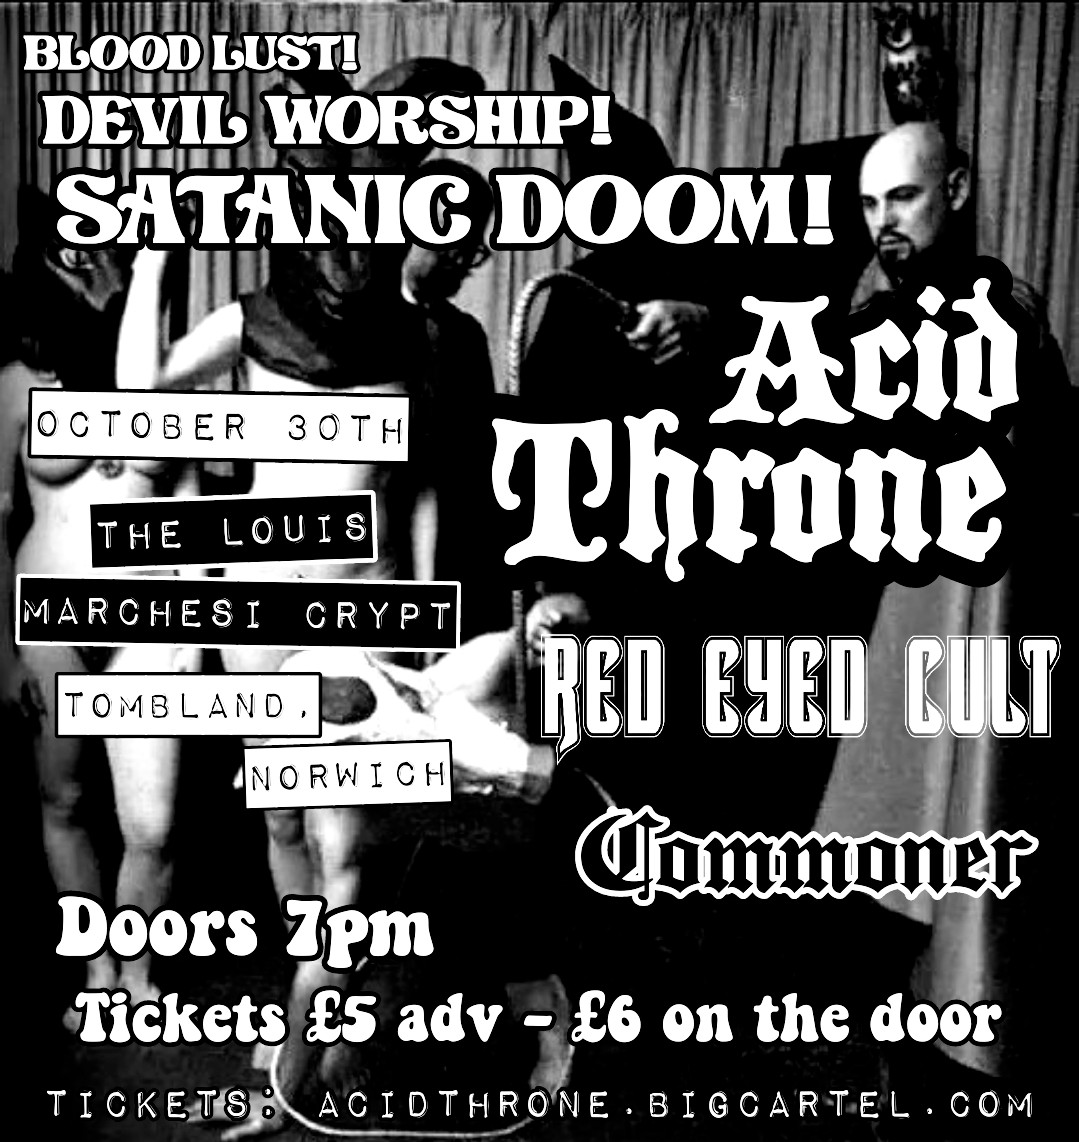 We haven't played a home town show in a hot minute, so we're throwing a party to celebrate our favourite time of year. Tickets are limited so don't sleep on this! Hit the link to grab one... linktr.ee/acidthrone 🍂🌾🎃 #acidthrone #redeyedcult #commomer #doom #stoner #Norwich